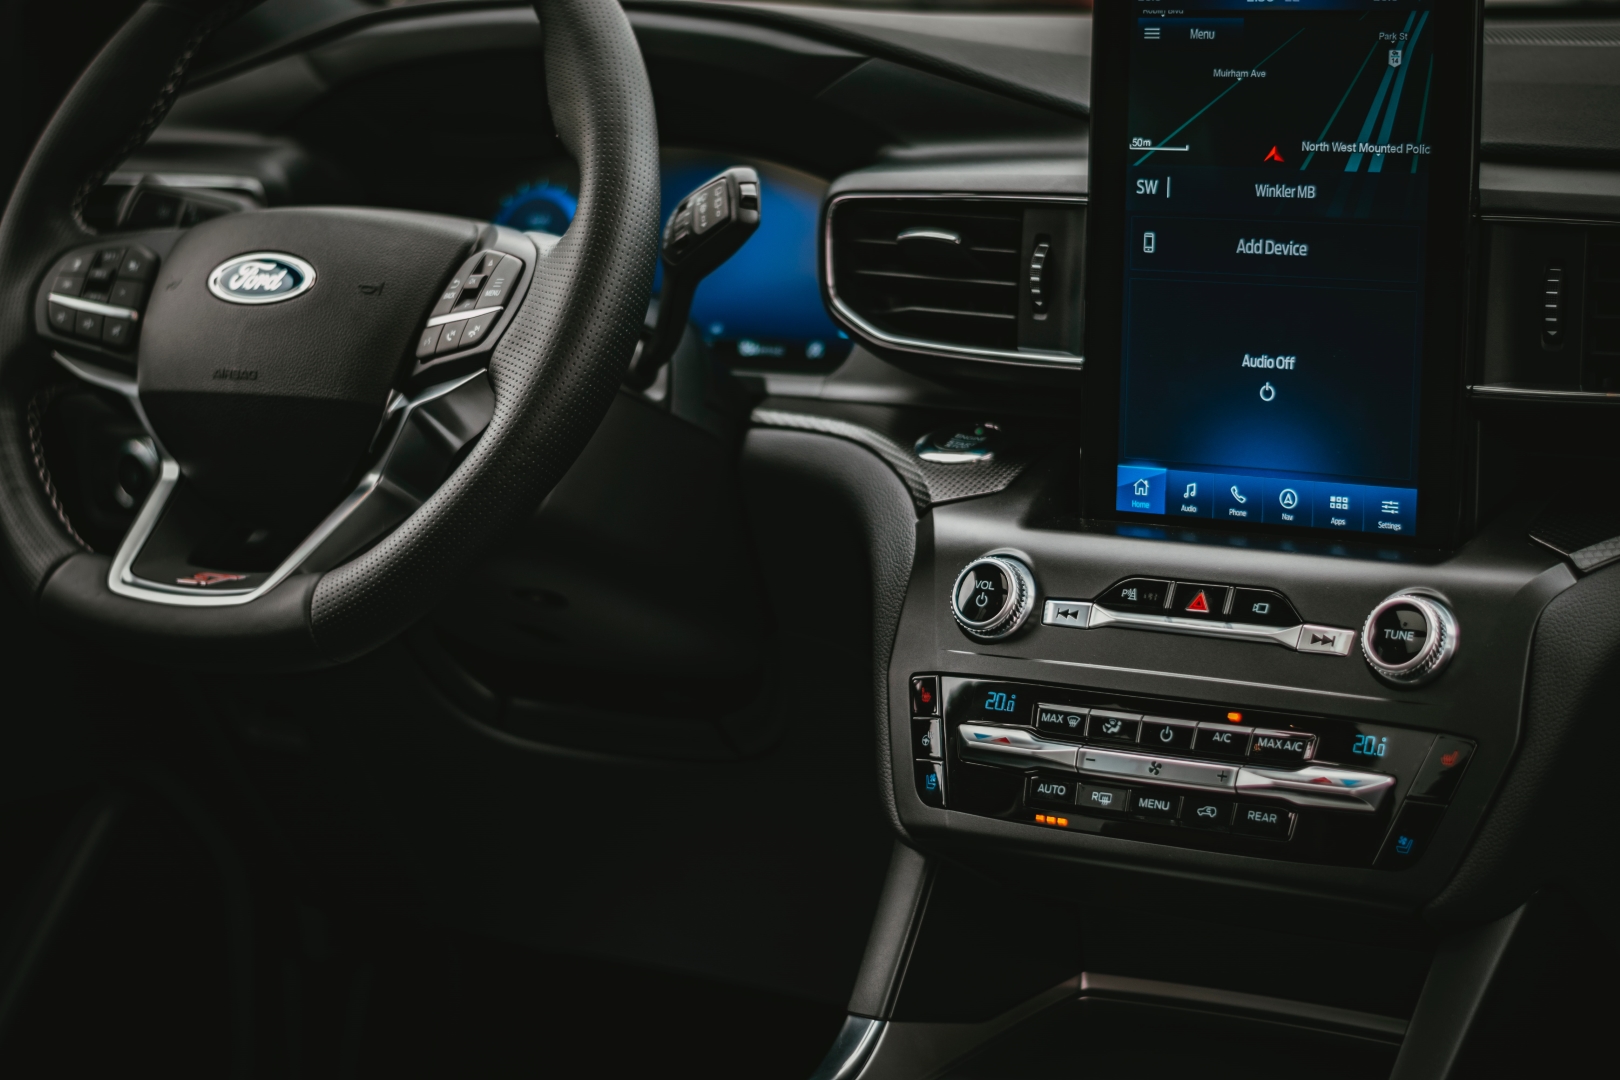 Ford Android Auto Unsplash